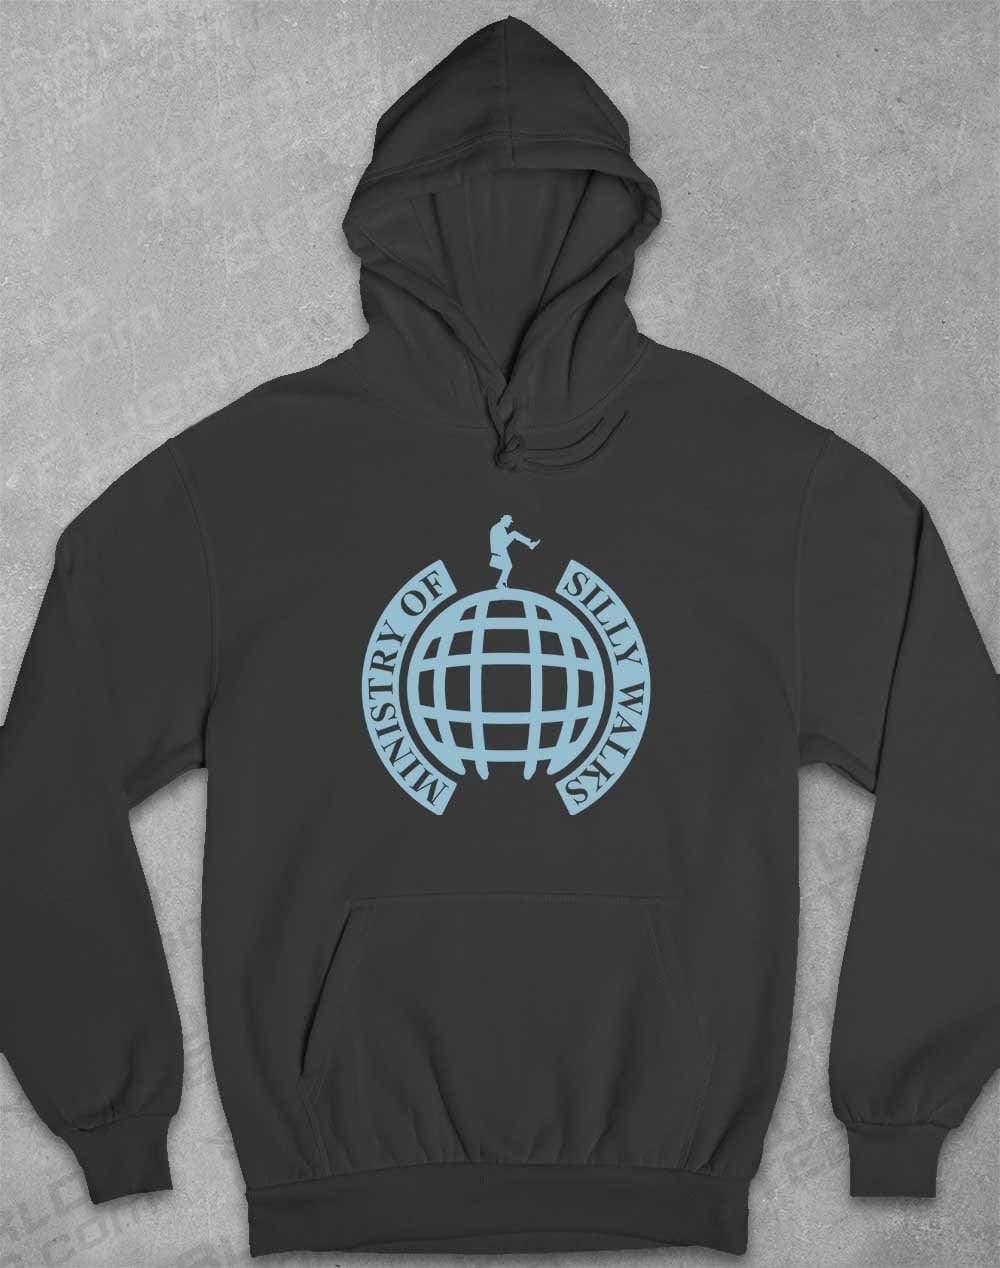 Ministry of Silly Walks Hoodie XS / Charcoal  - Off World Tees